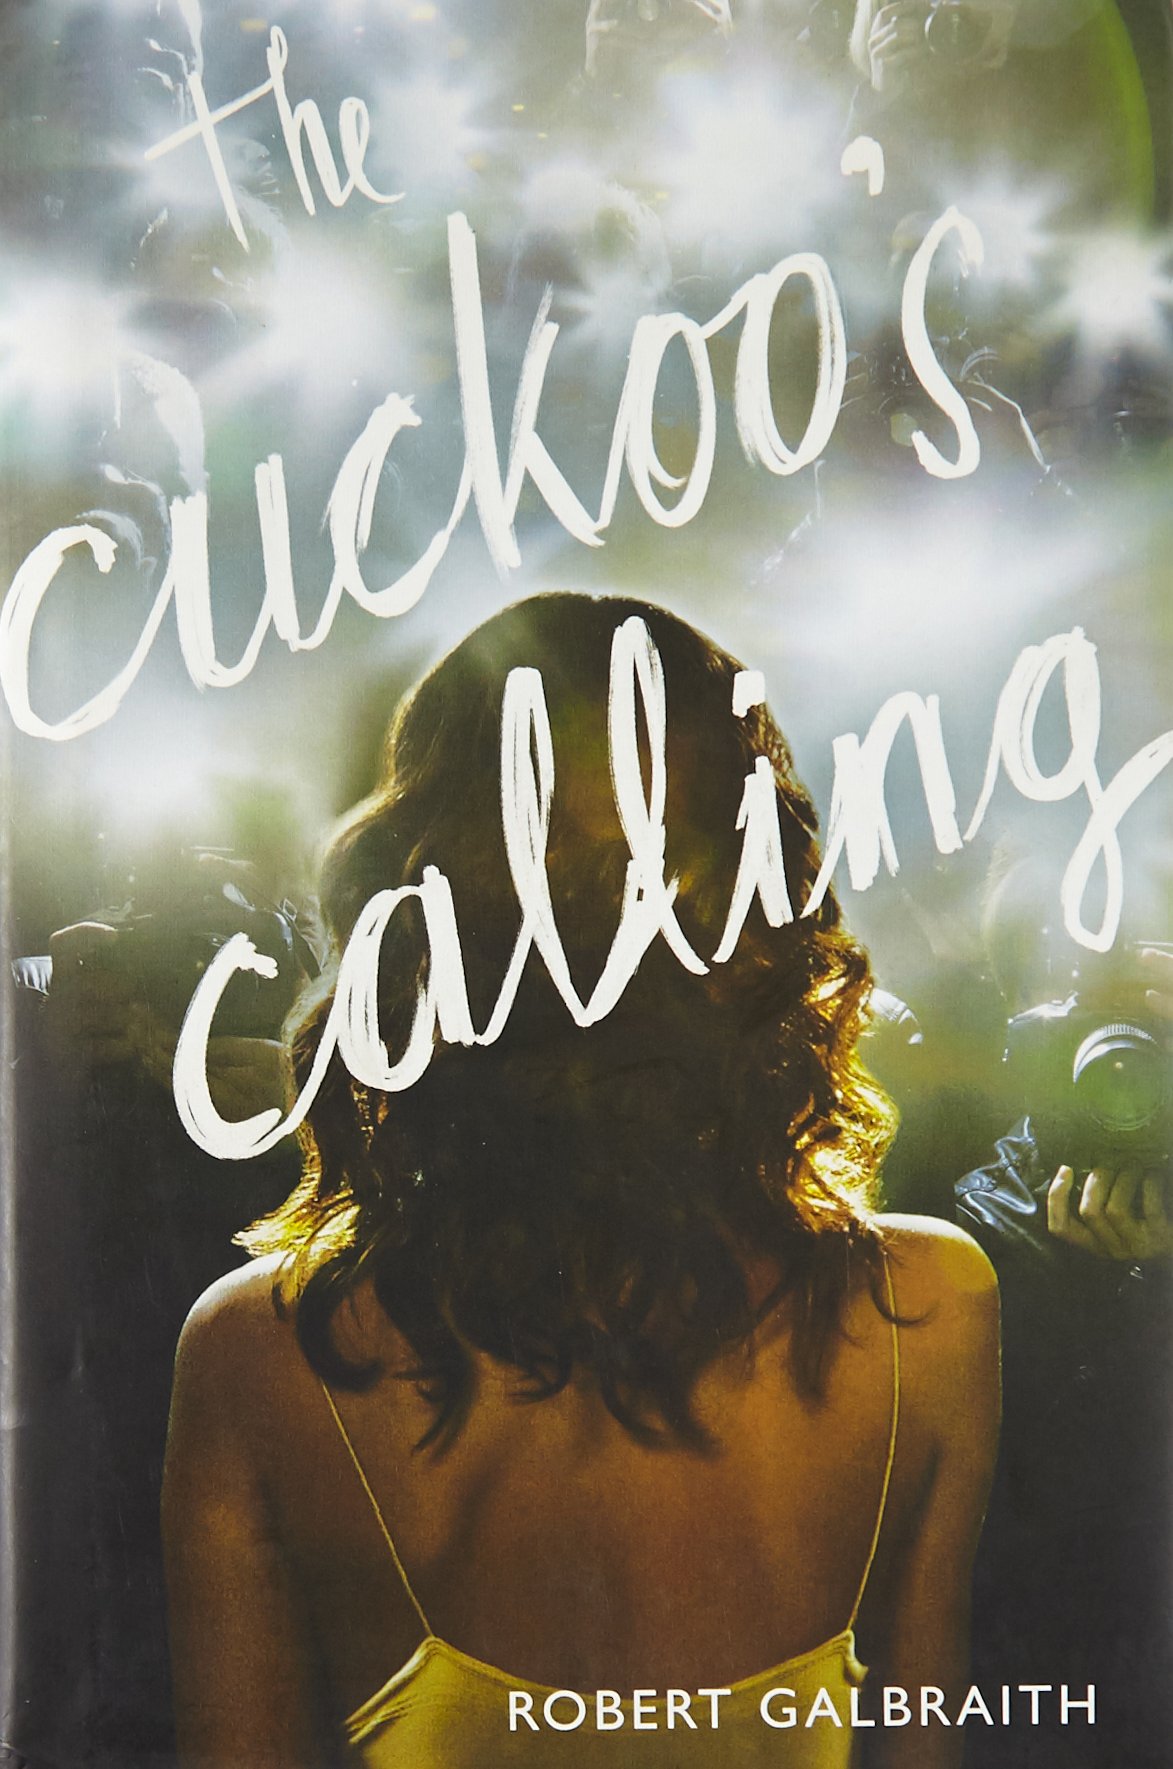 Cover of The Cuckoo's Calling" by Robert Galbraith